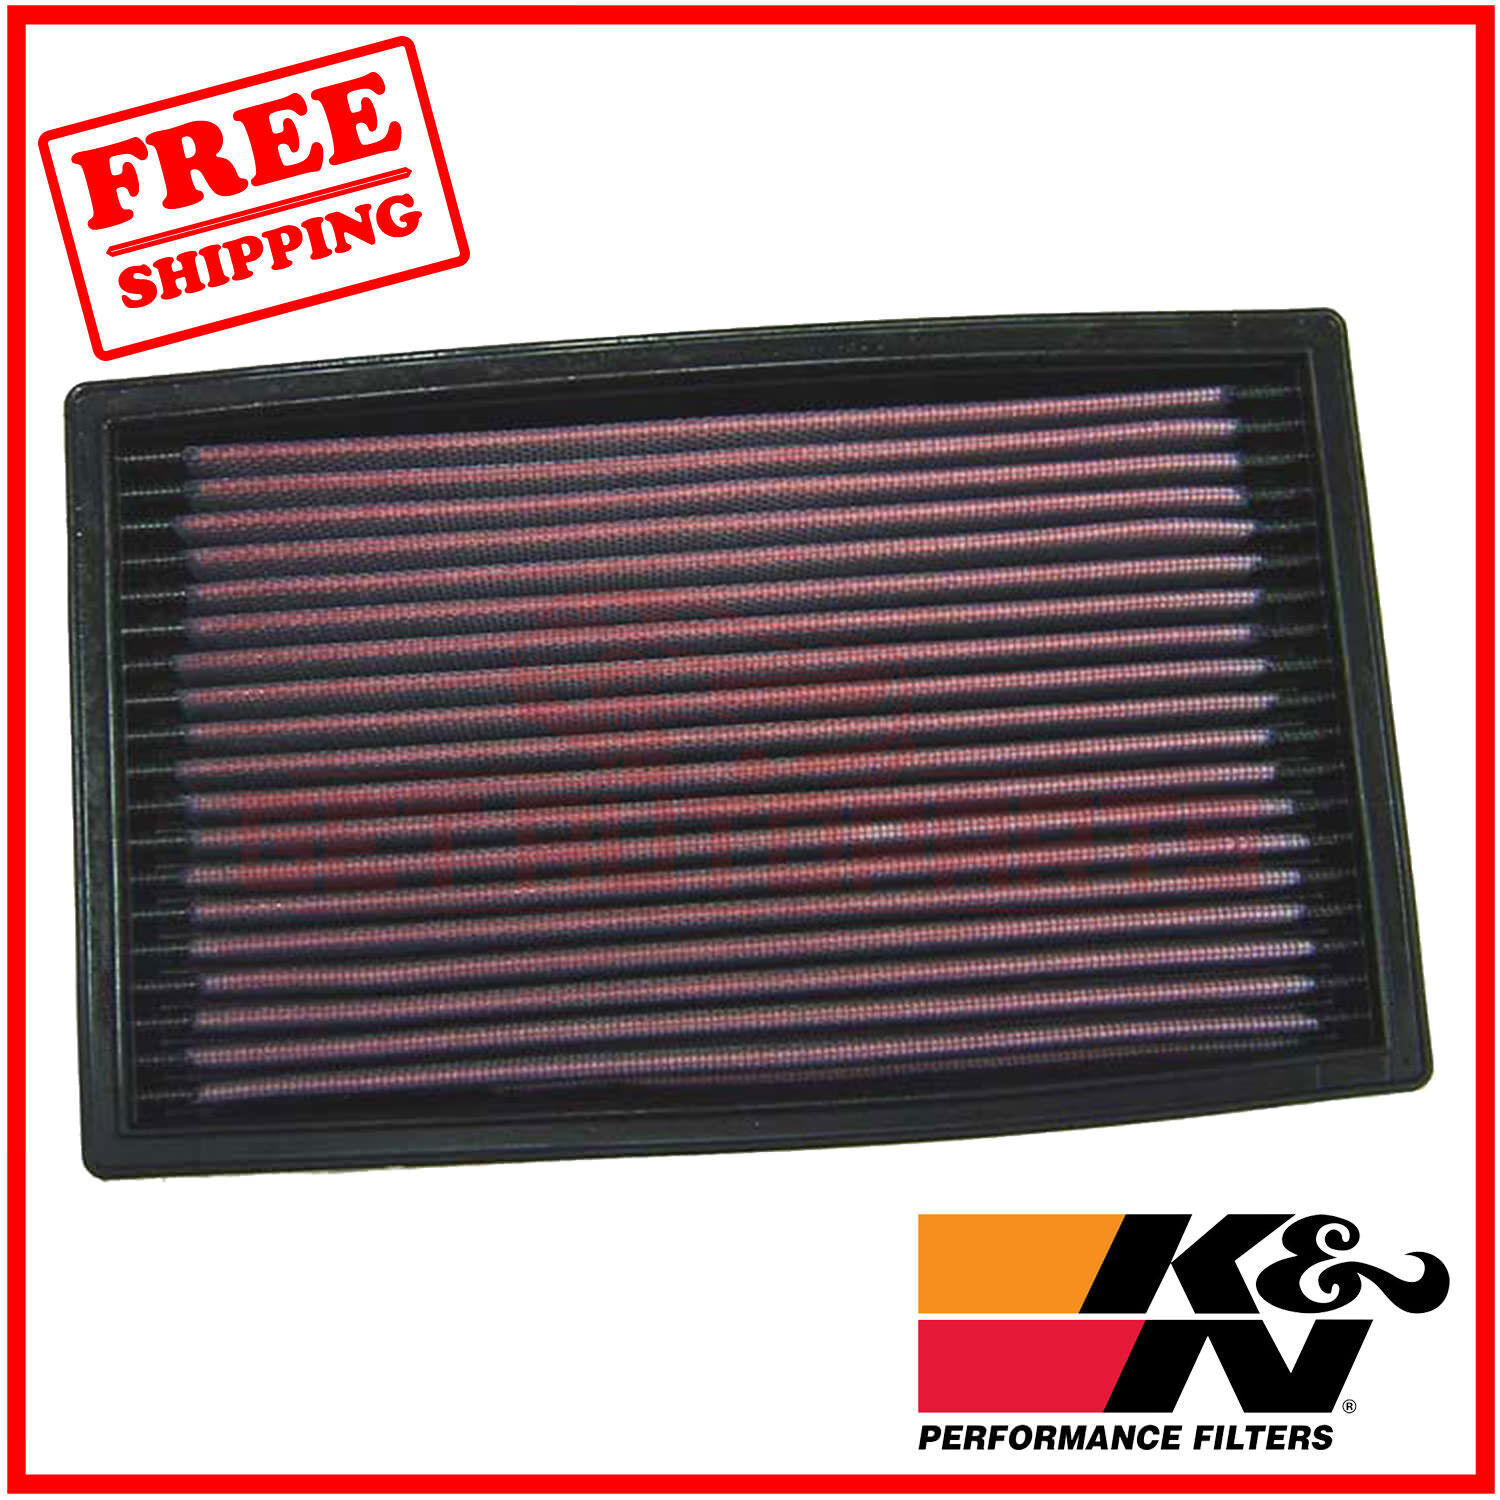 K&N Replacement Air Filter for Mercury Tracer 1991-1995